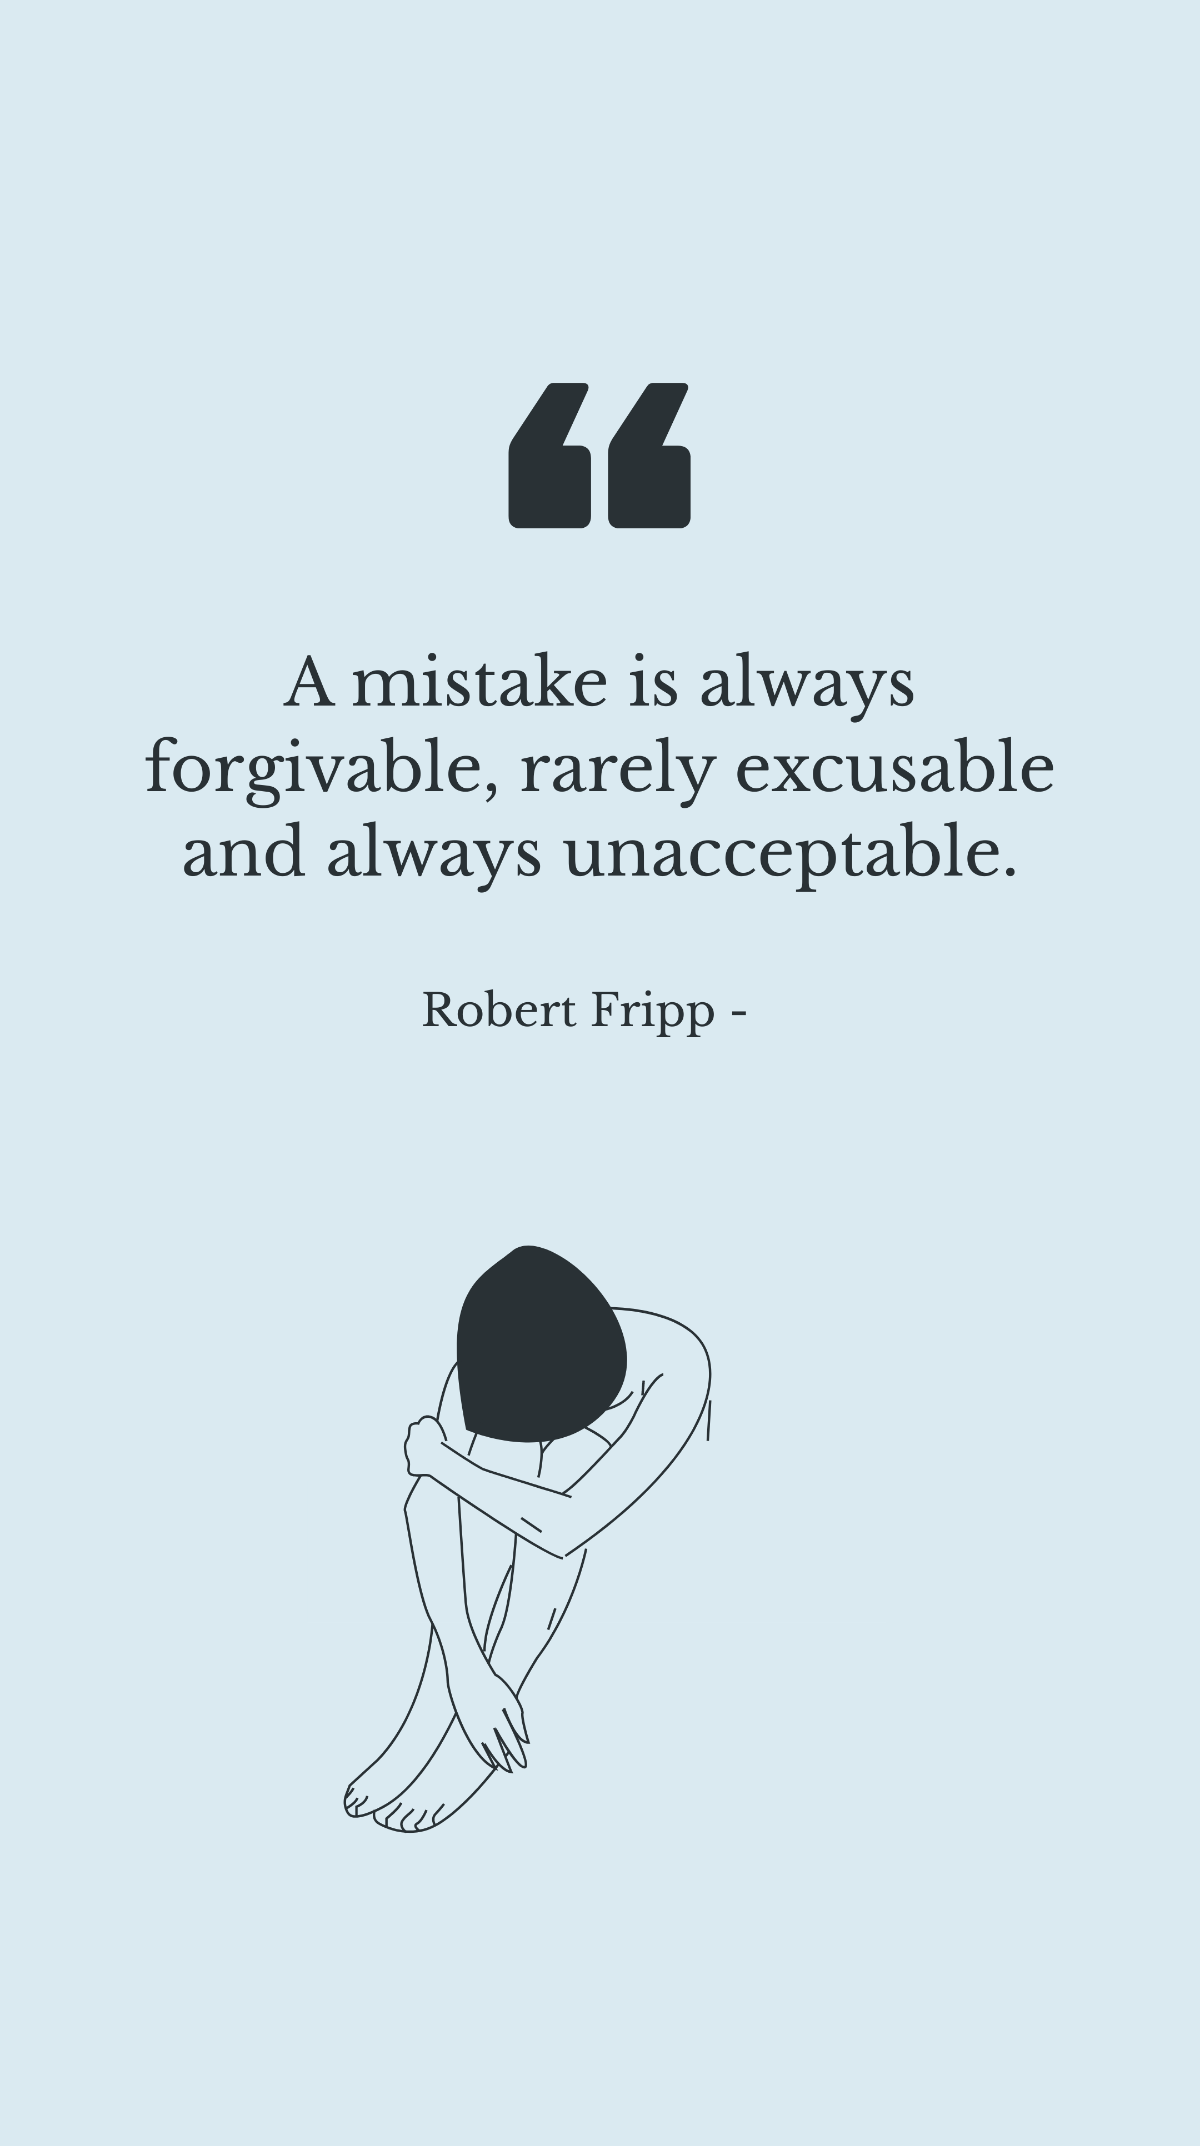 Robert Fripp - A mistake is always forgivable, rarely excusable and always unacceptable. Template